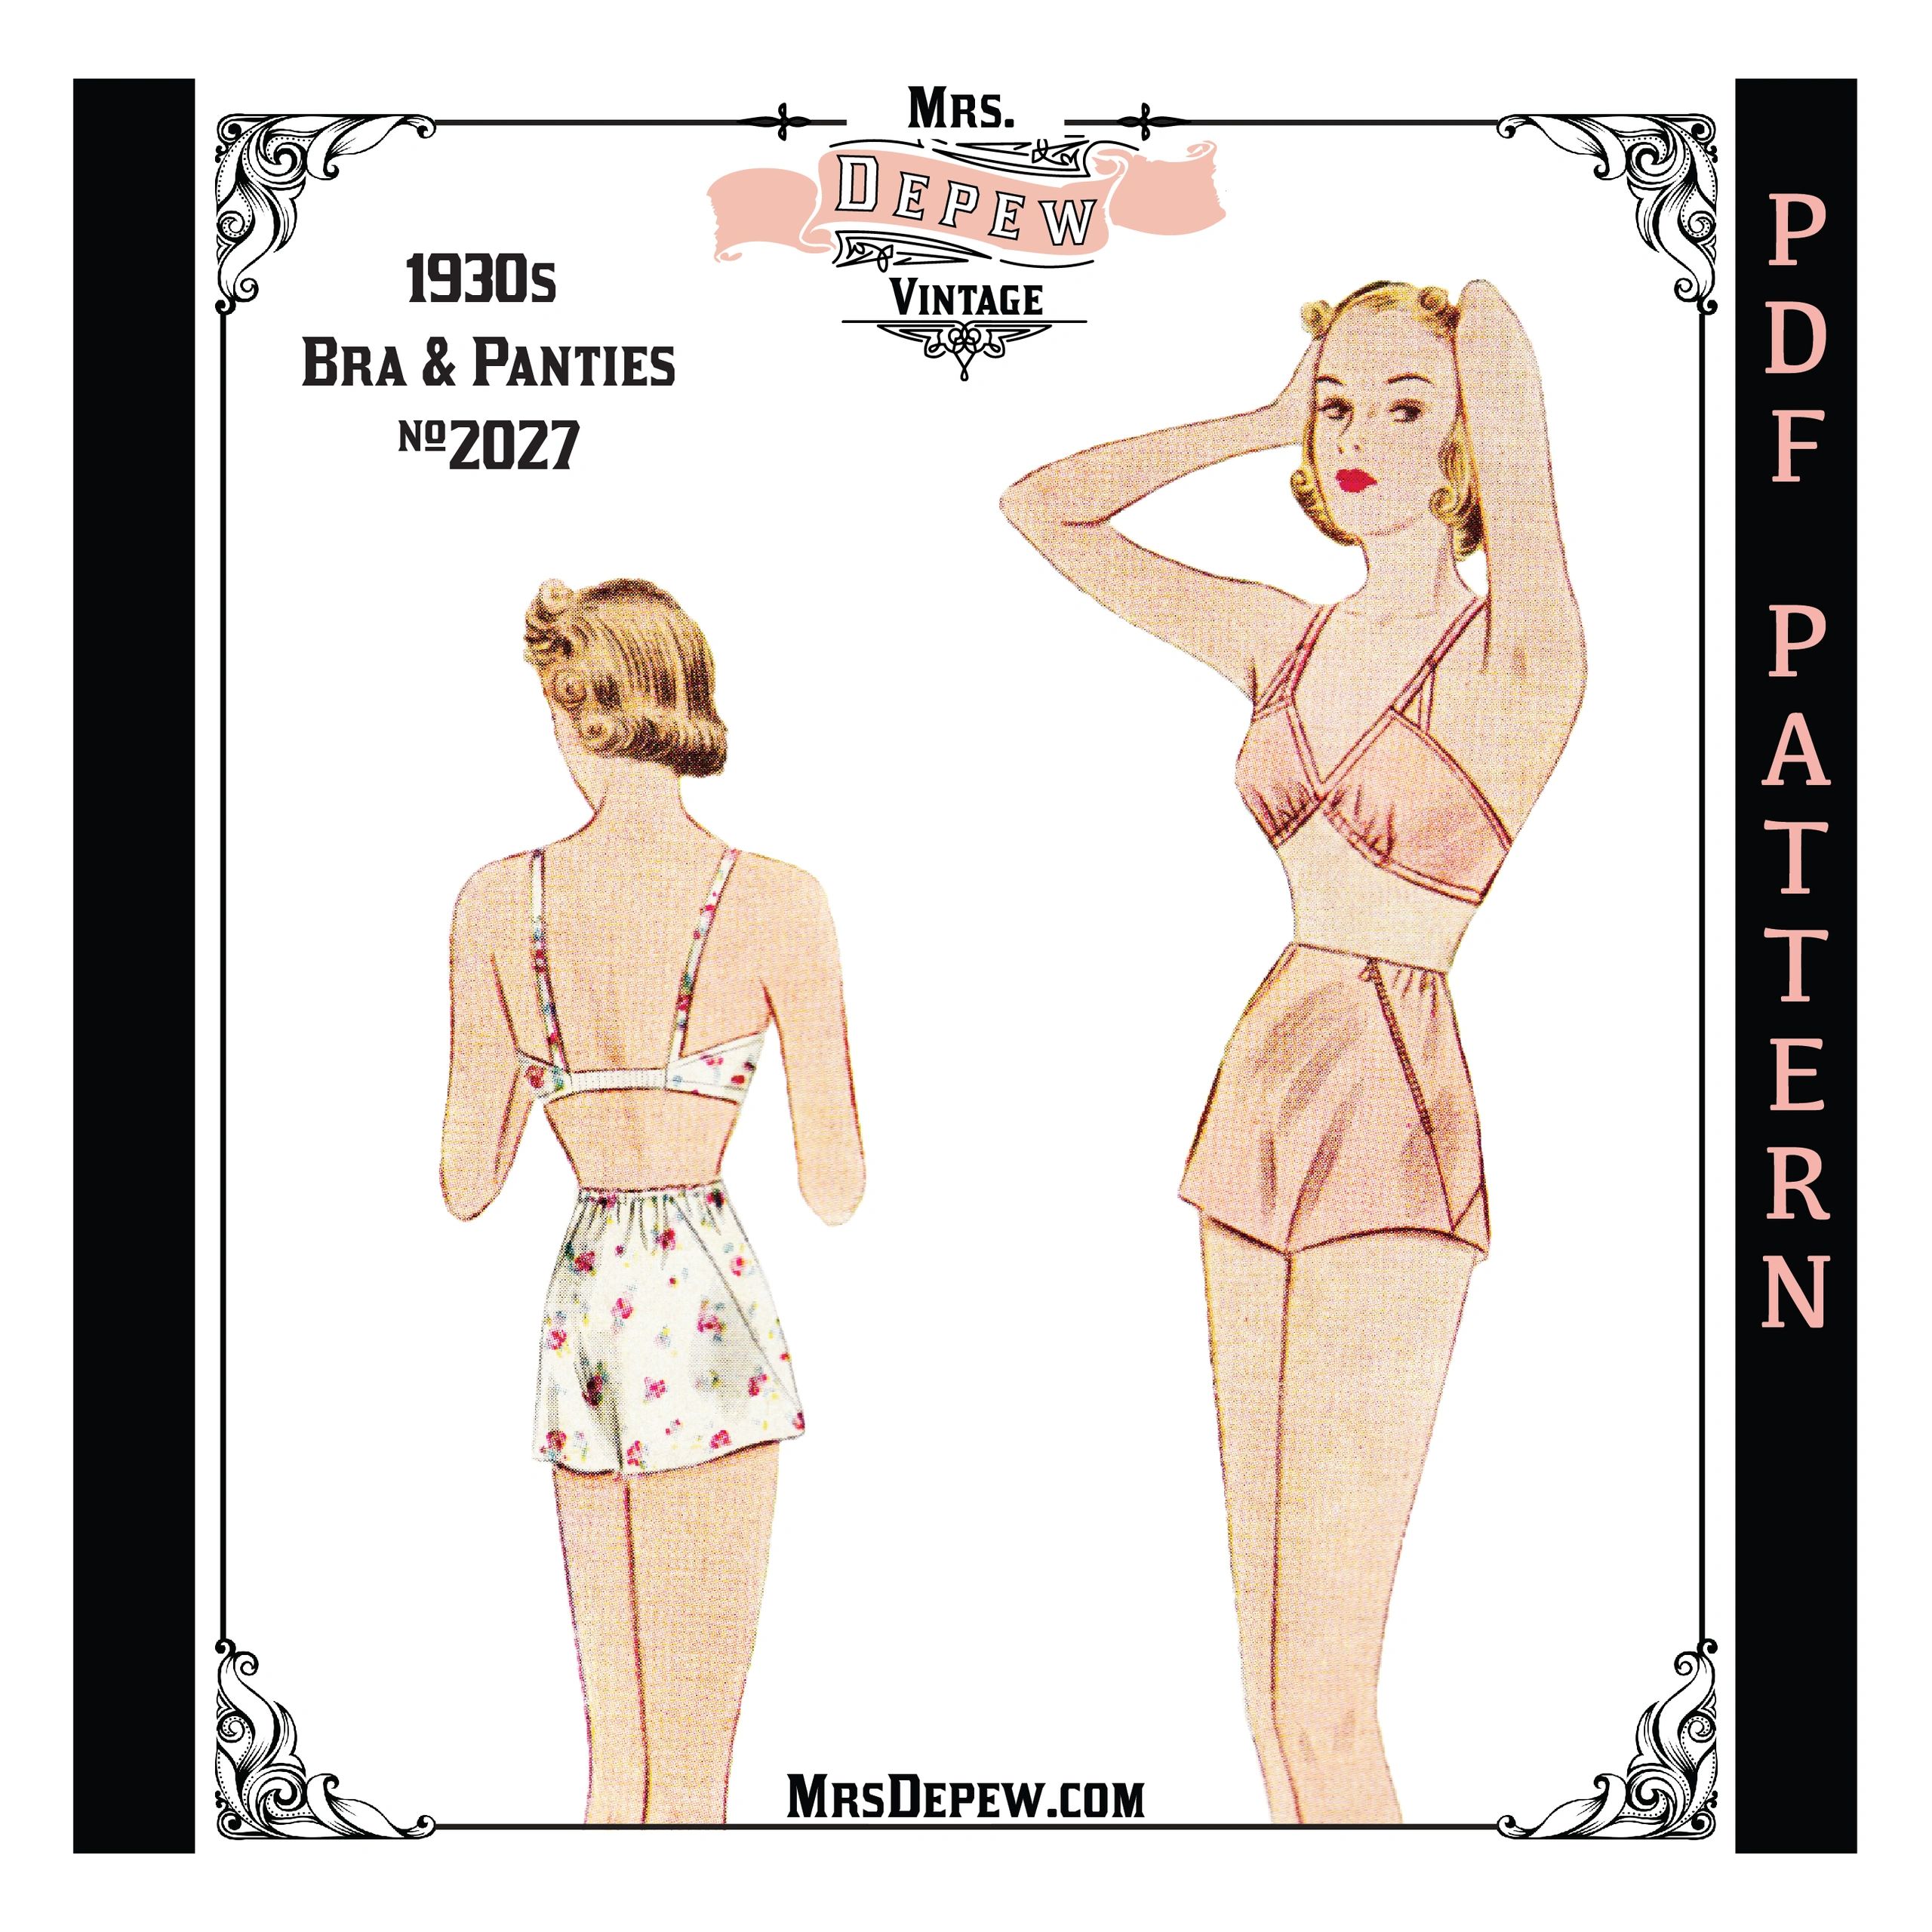 1920s flapper style lingerie sewing pattern bra & bloomers – Lady